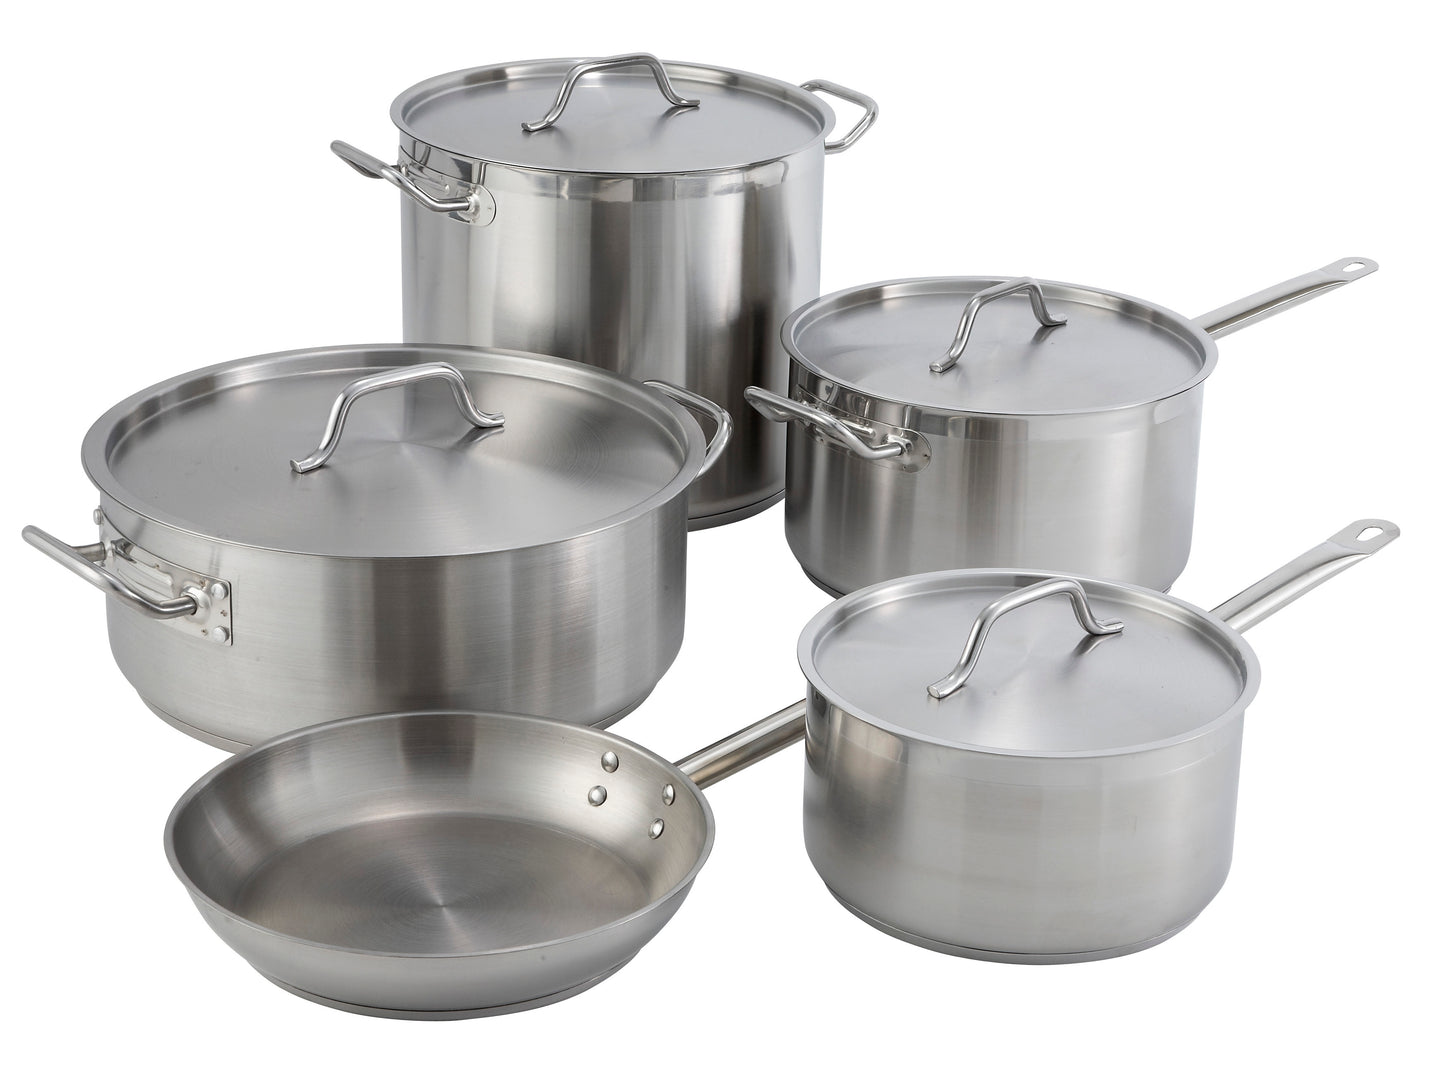 SSSP-7 - Stainless Steel Sauce Pan with Cover - 7-1/2 Quart